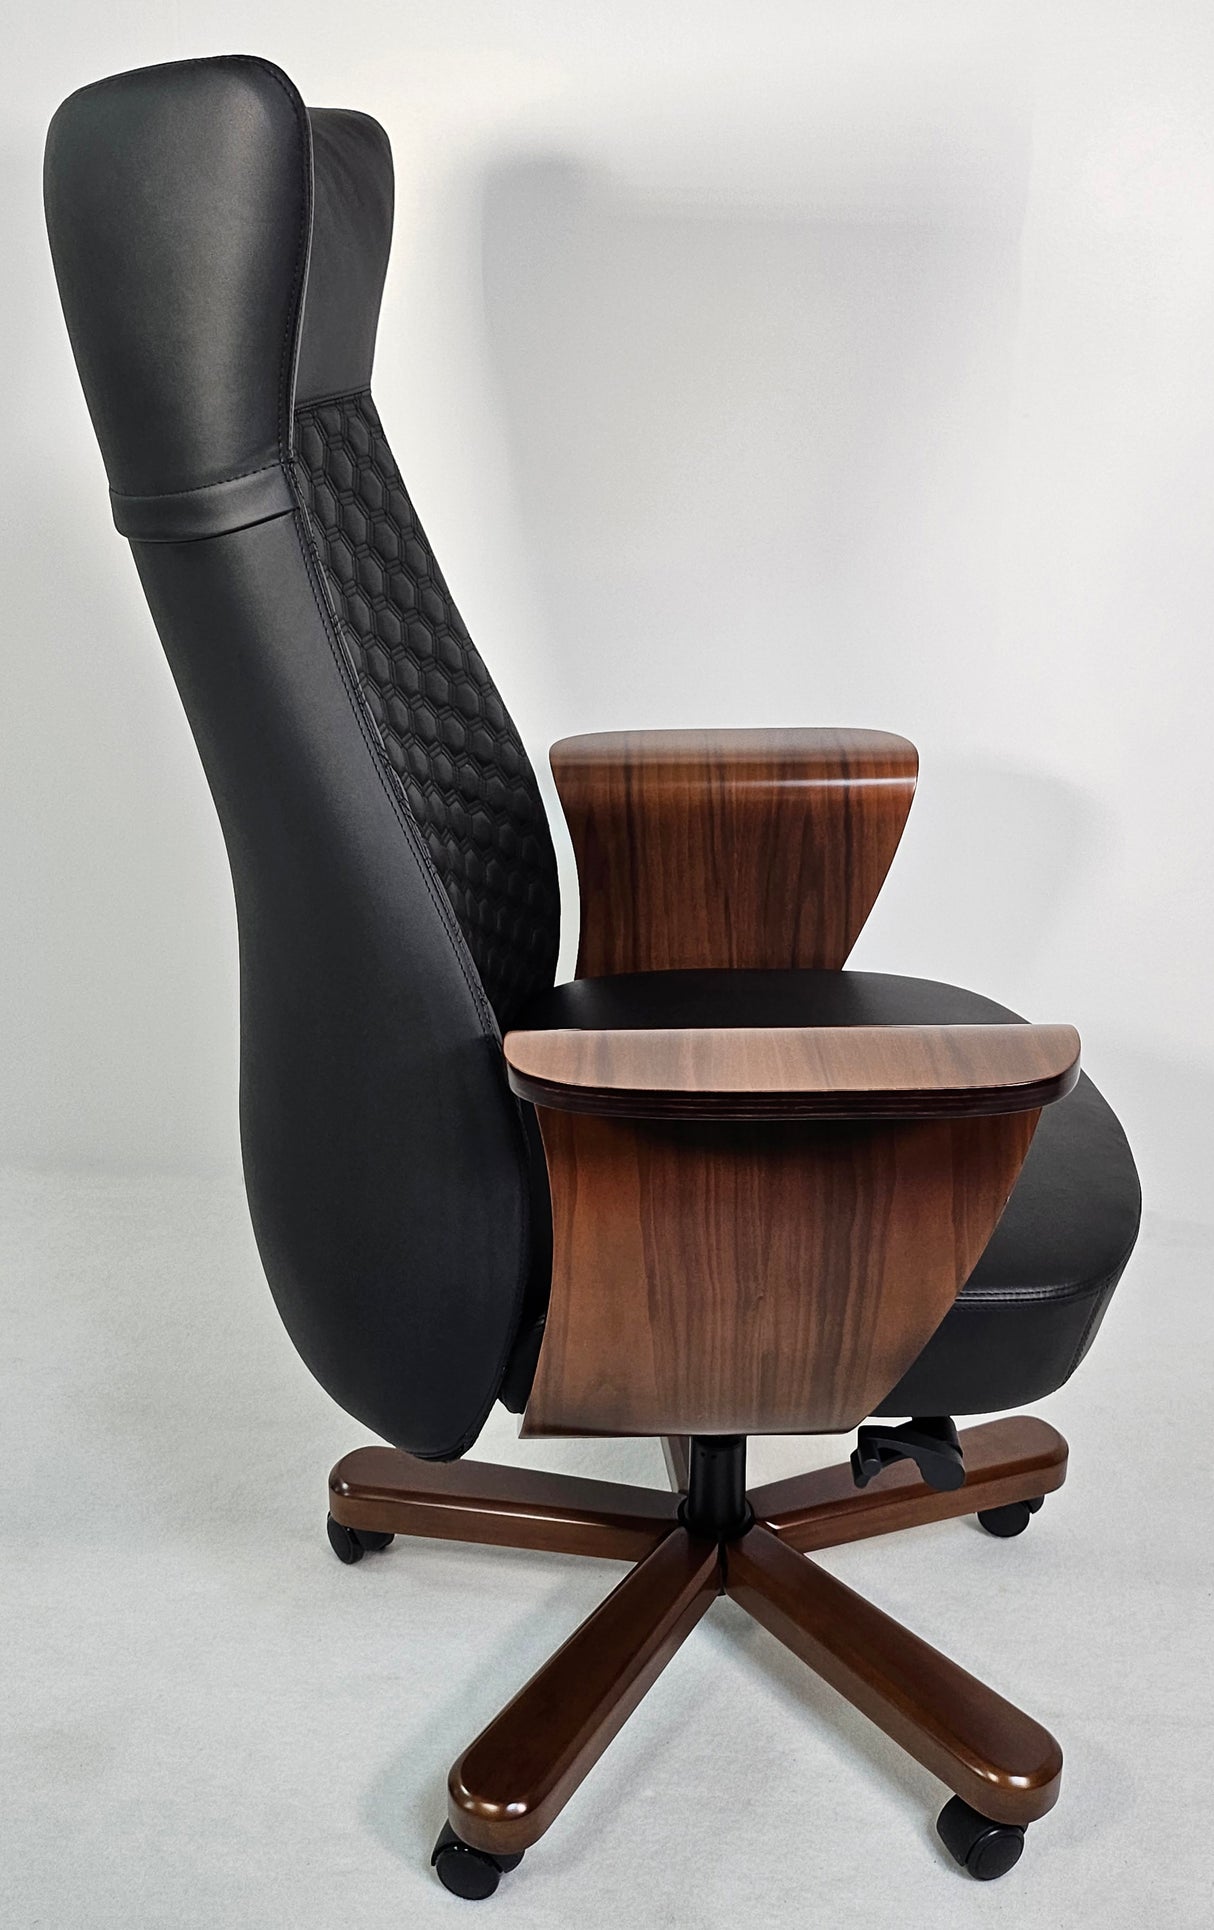 Modern Genuine Black Leather High Back Office Chair with Hexagonal Design - 6084HL